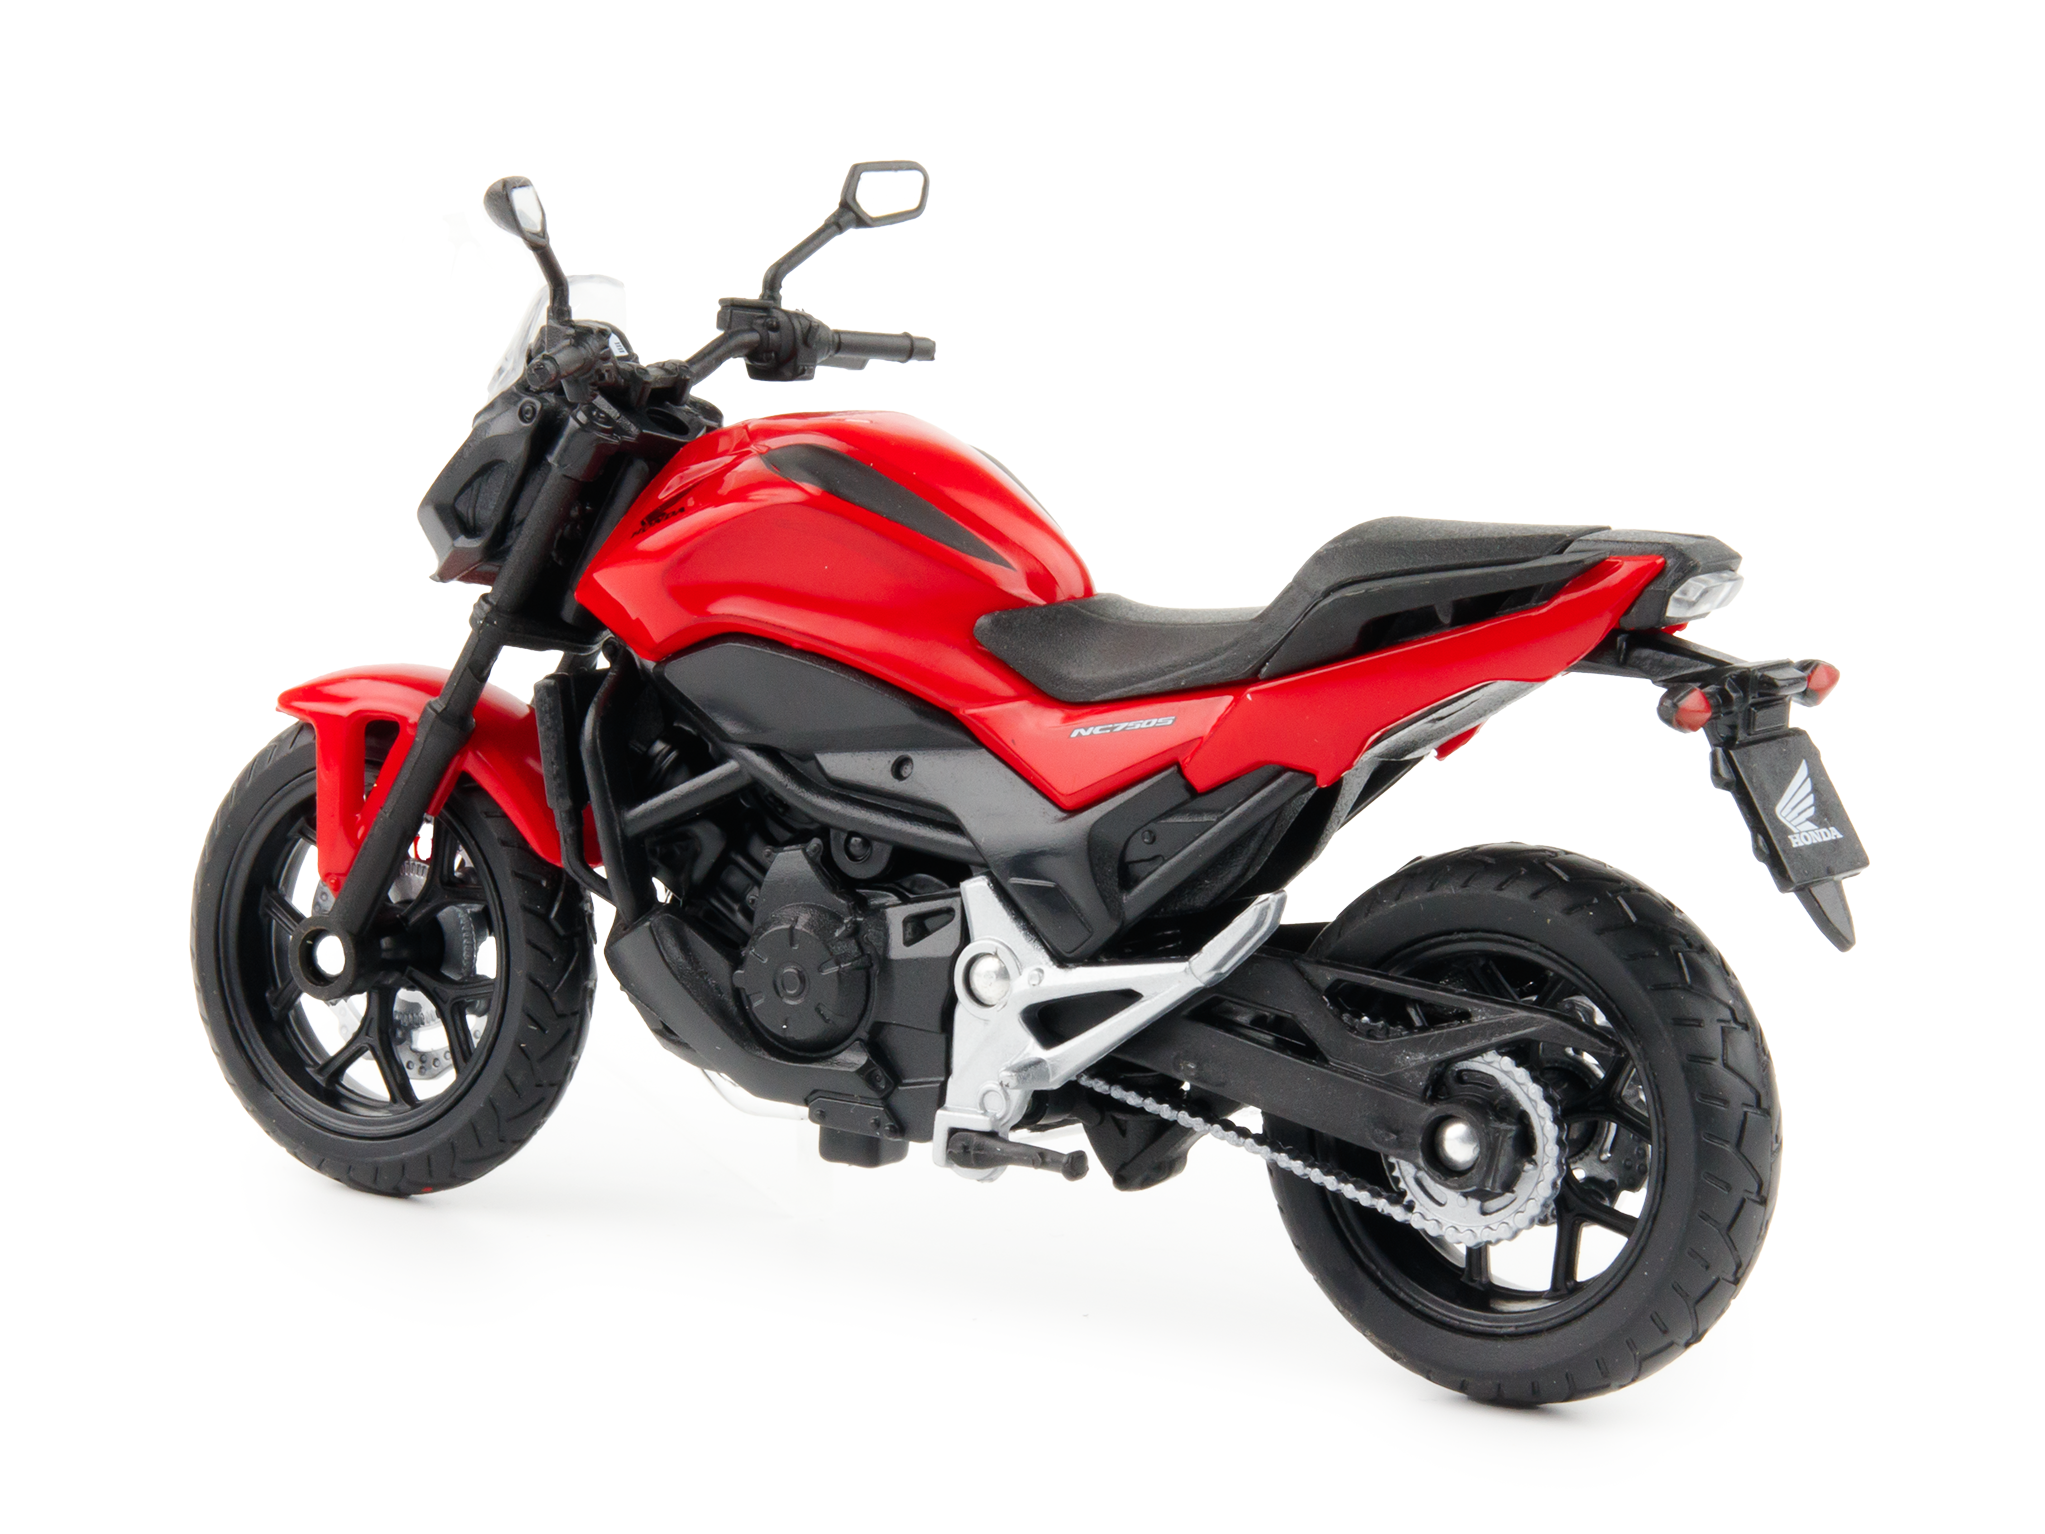 Honda NC750S 2018 red - 1:18 Scale Diecast Model Motorcycle